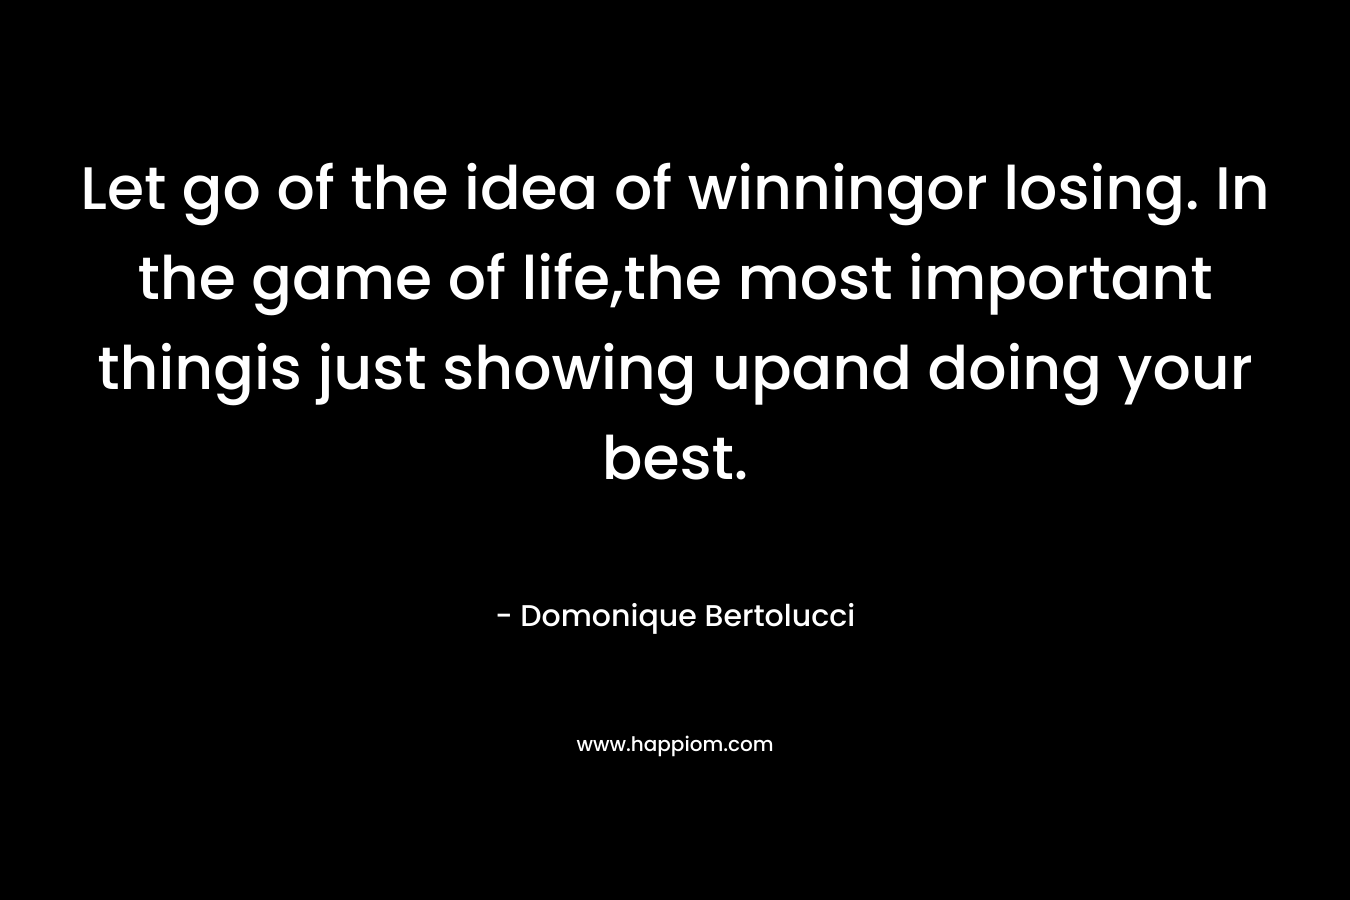 Let go of the idea of winningor losing. In the game of life,the most important thingis just showing upand doing your best. – Domonique Bertolucci